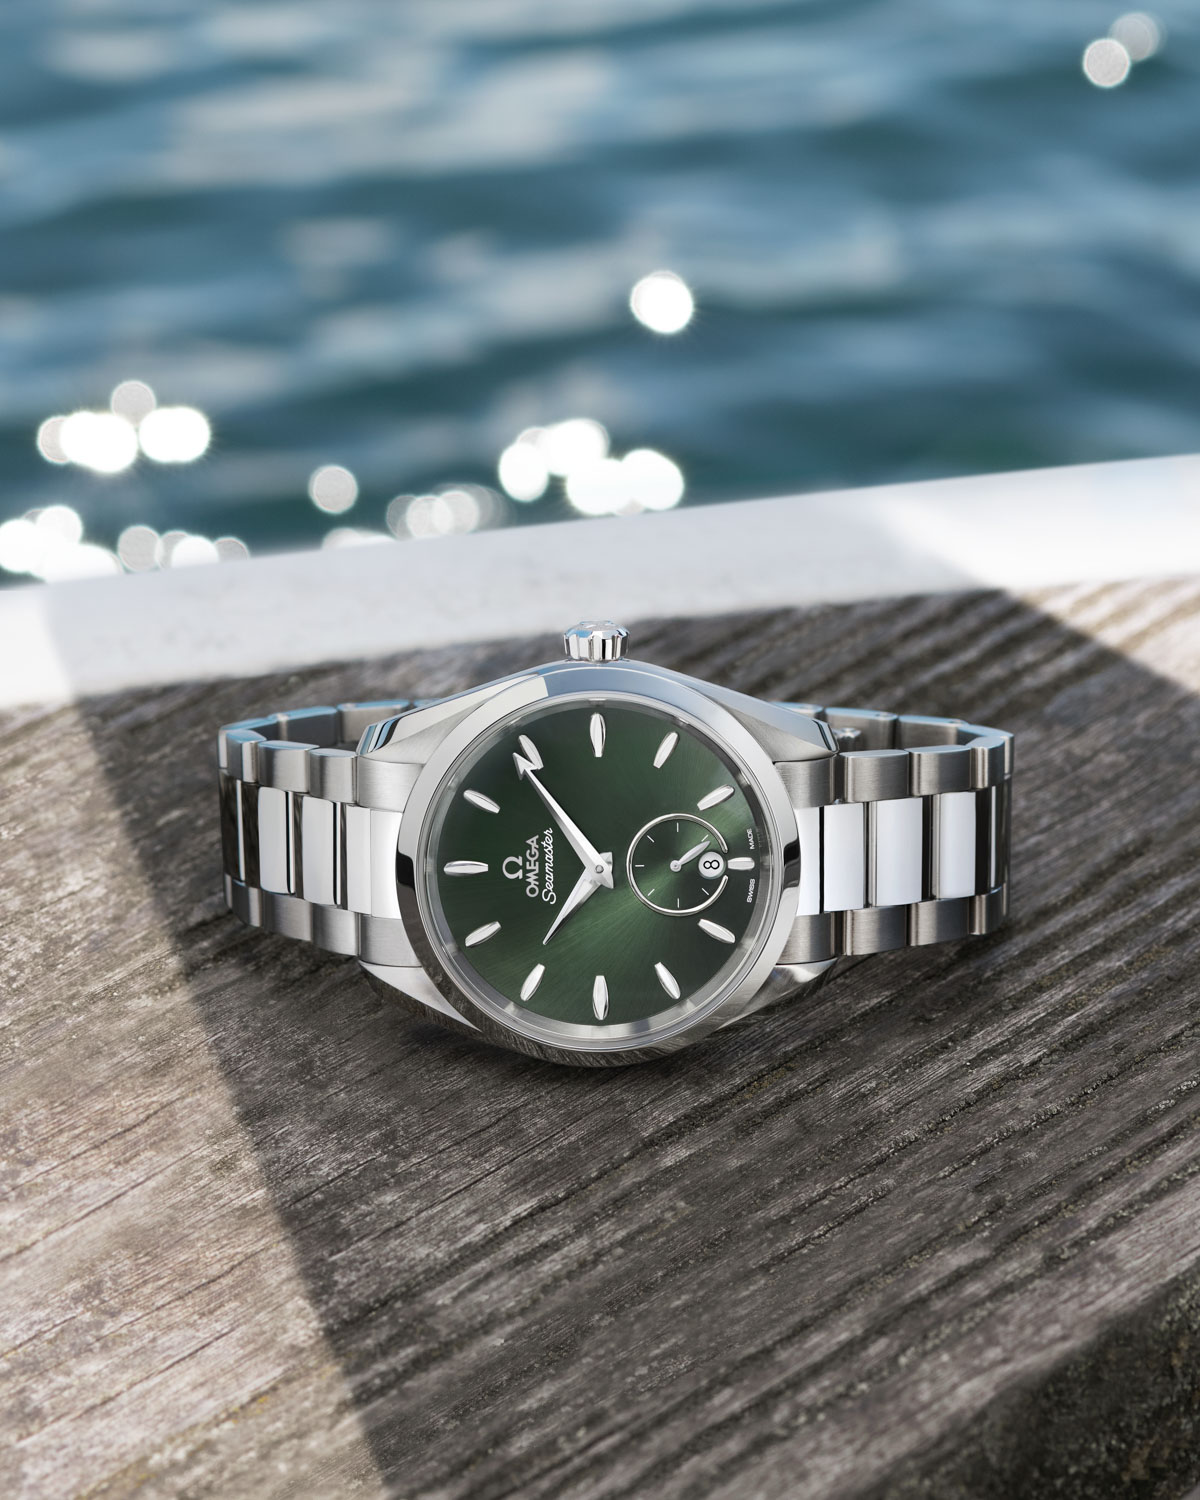 38mm Aqua Terra 150m with a green dial and mother-of-pearl hour markers